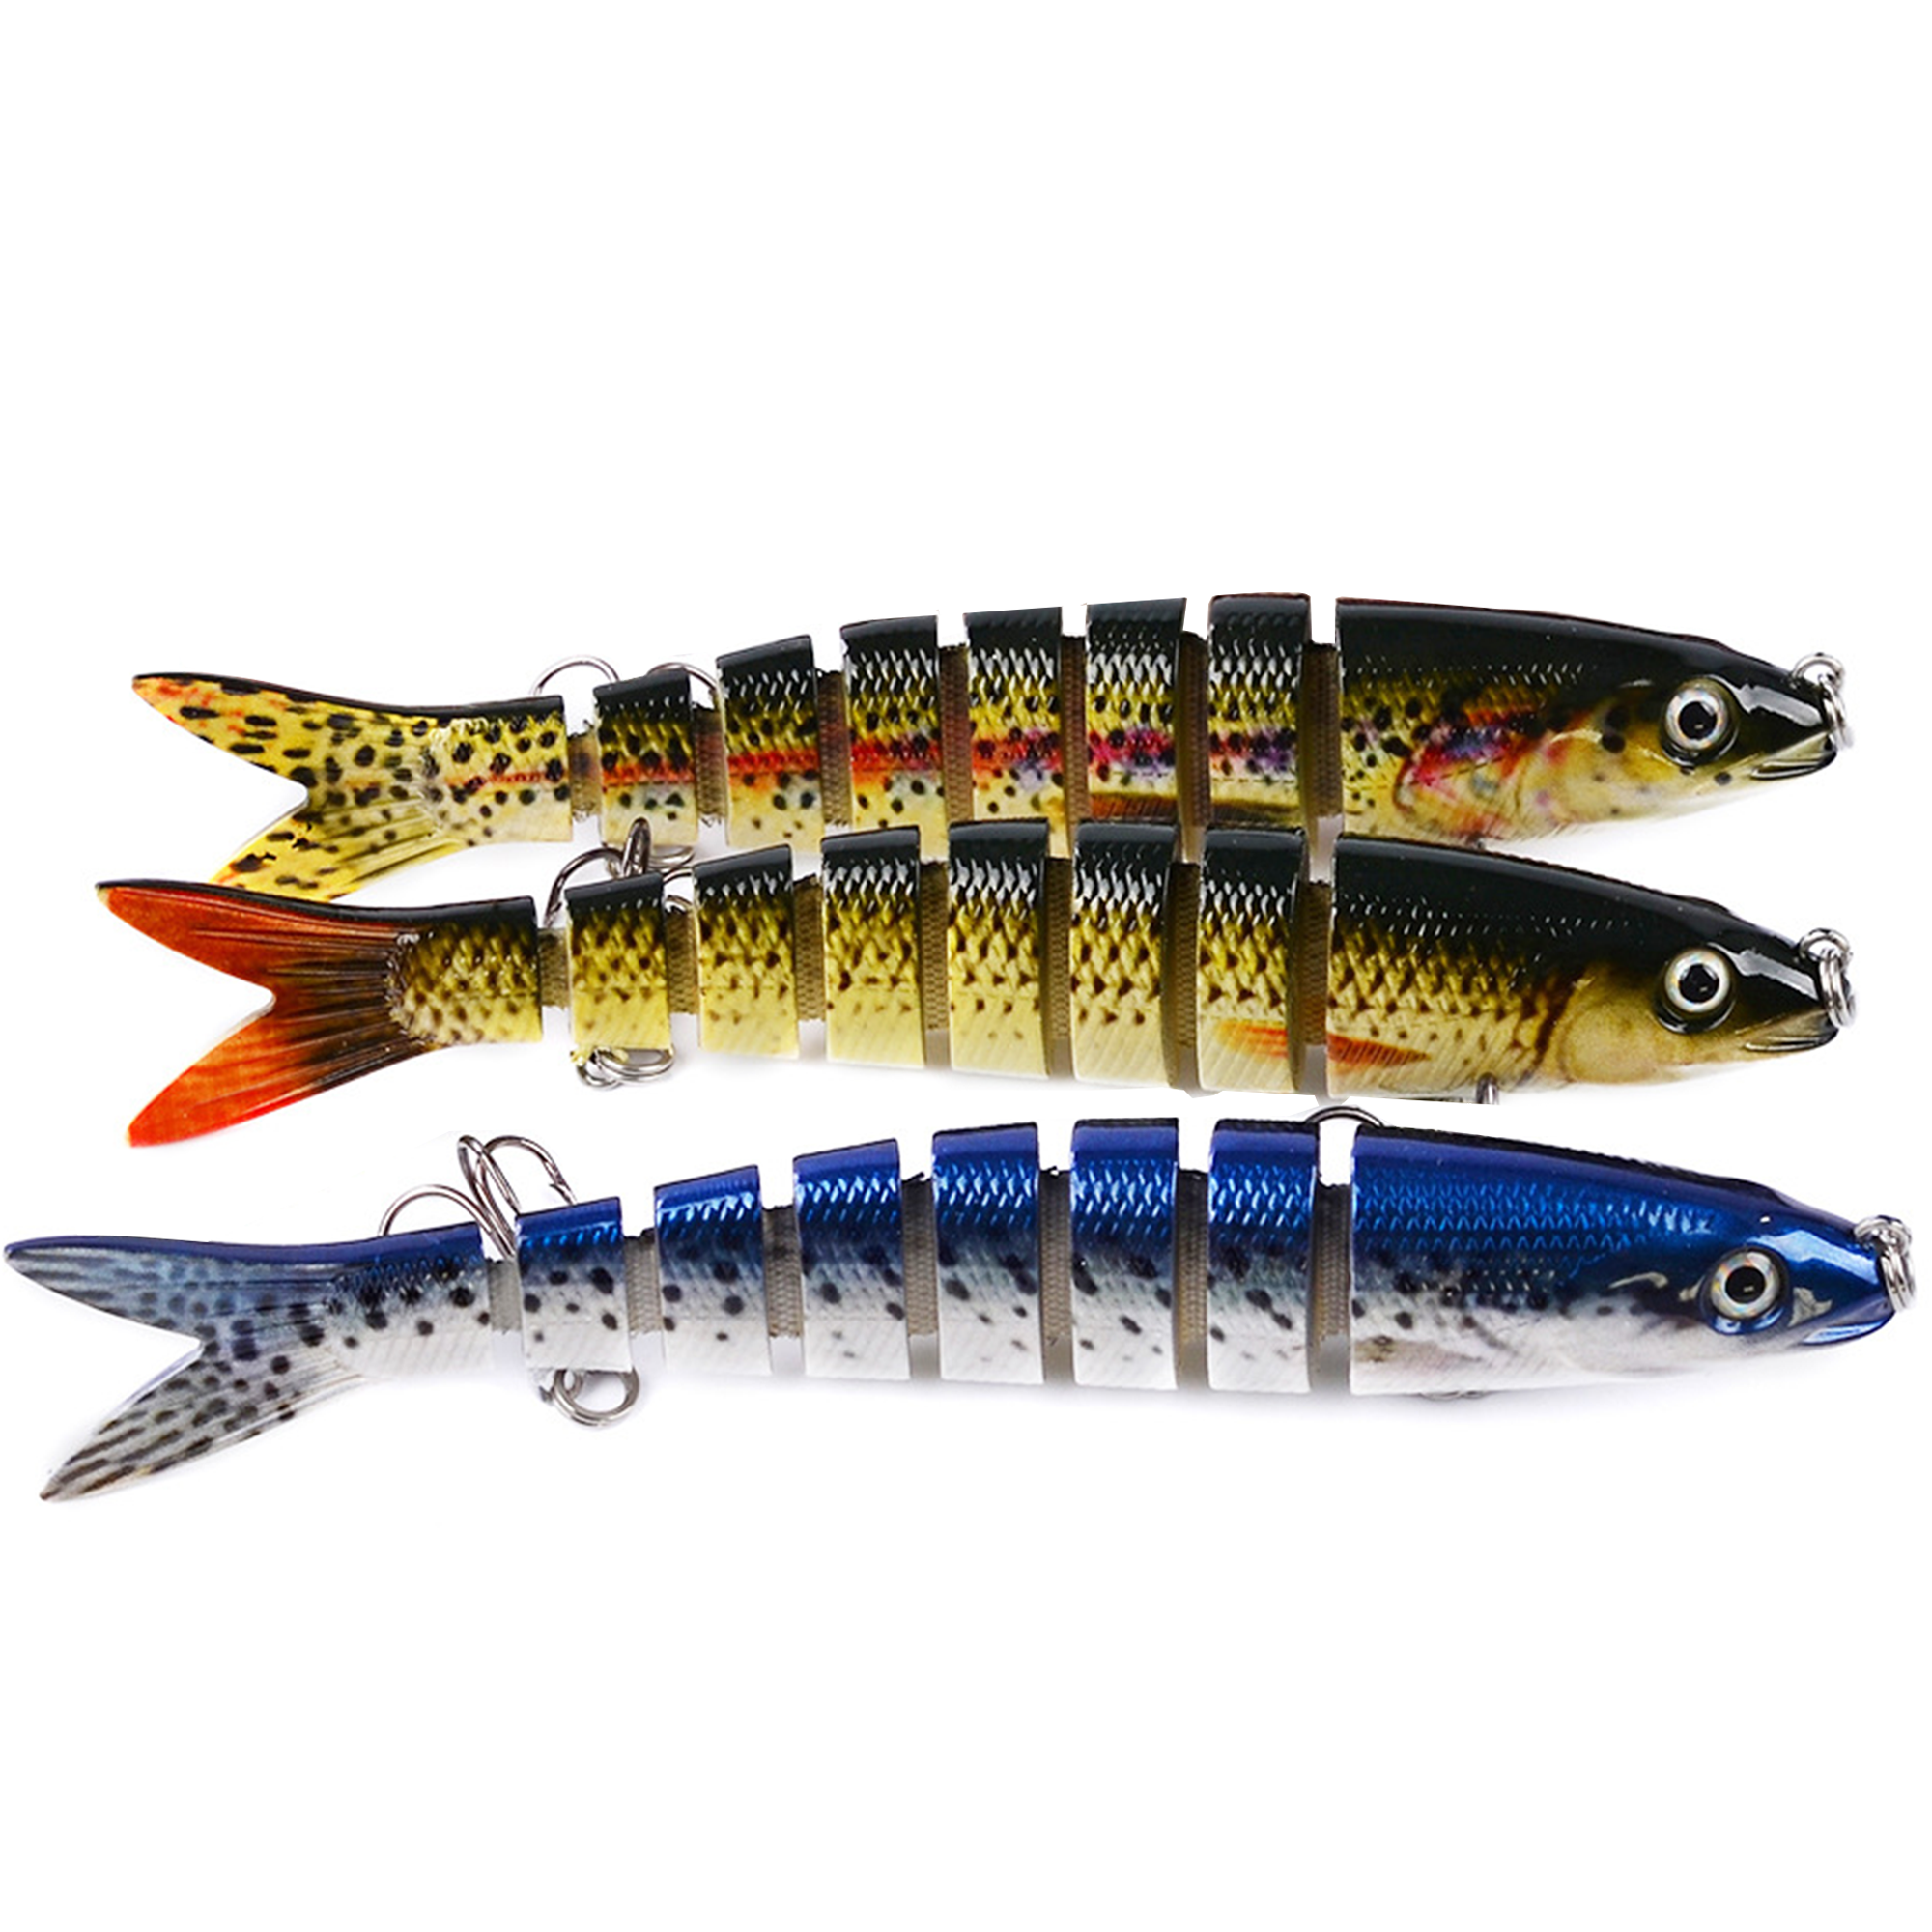 Bass Lure Freshwater Kit, Segmented Fishing Lure with Bkk Hooks, Paddle  Tail Jointed Swimbaits for Bass Fishing, Sinking Action Trout Bait with  Noisy